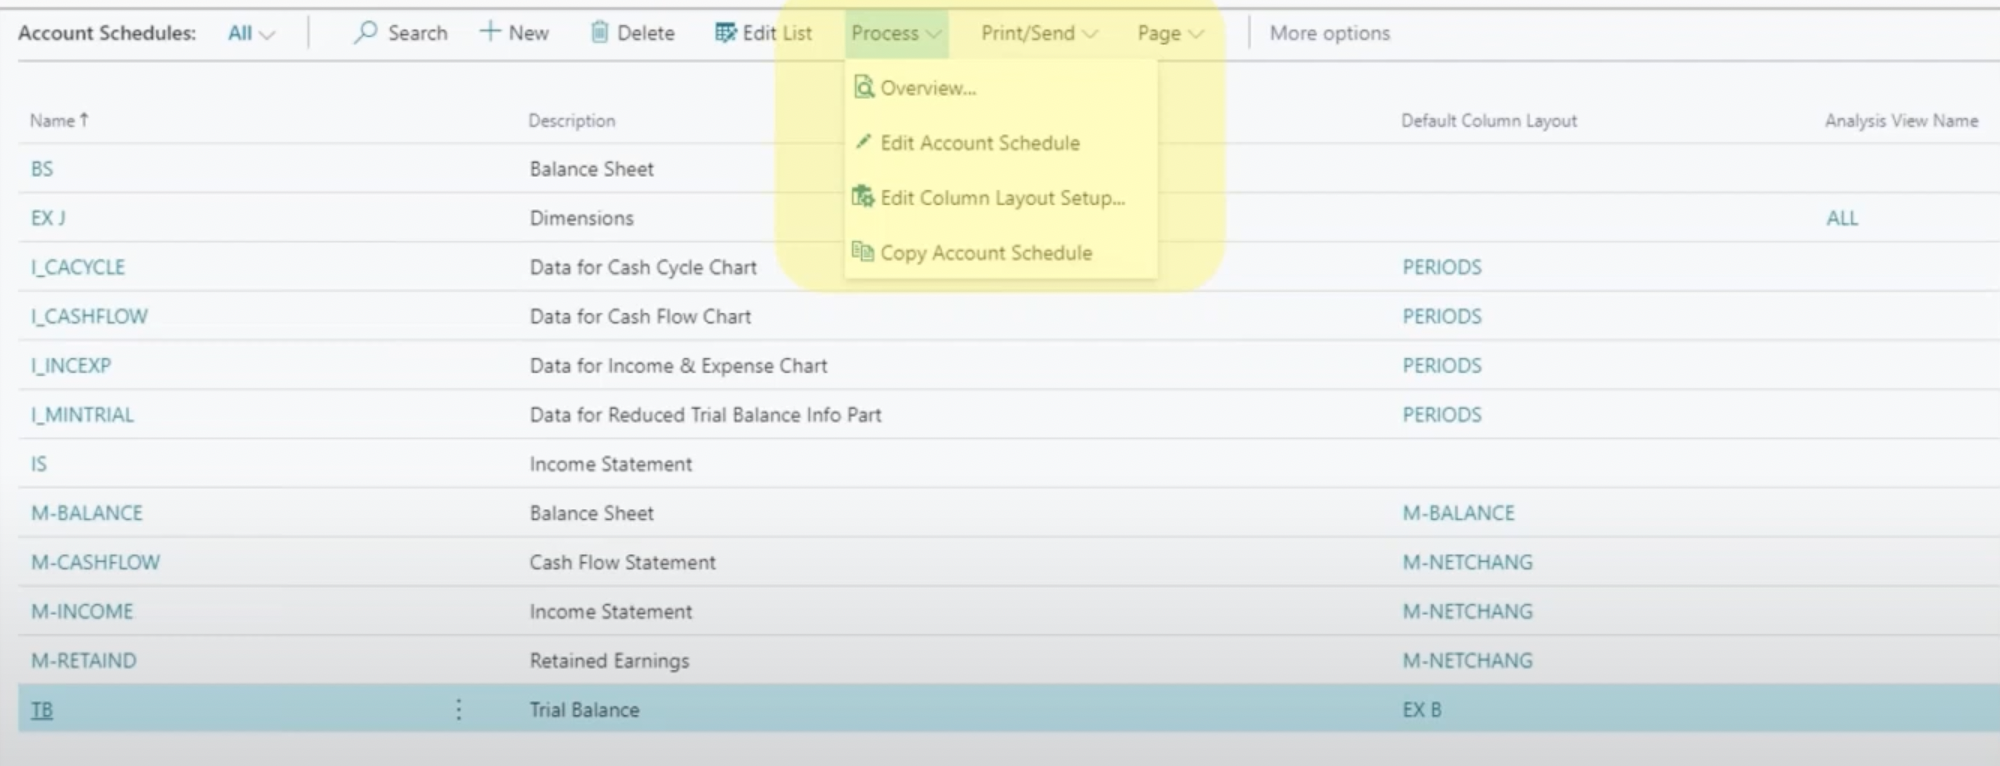 account schedules navigation menu in dynamics 365 business central